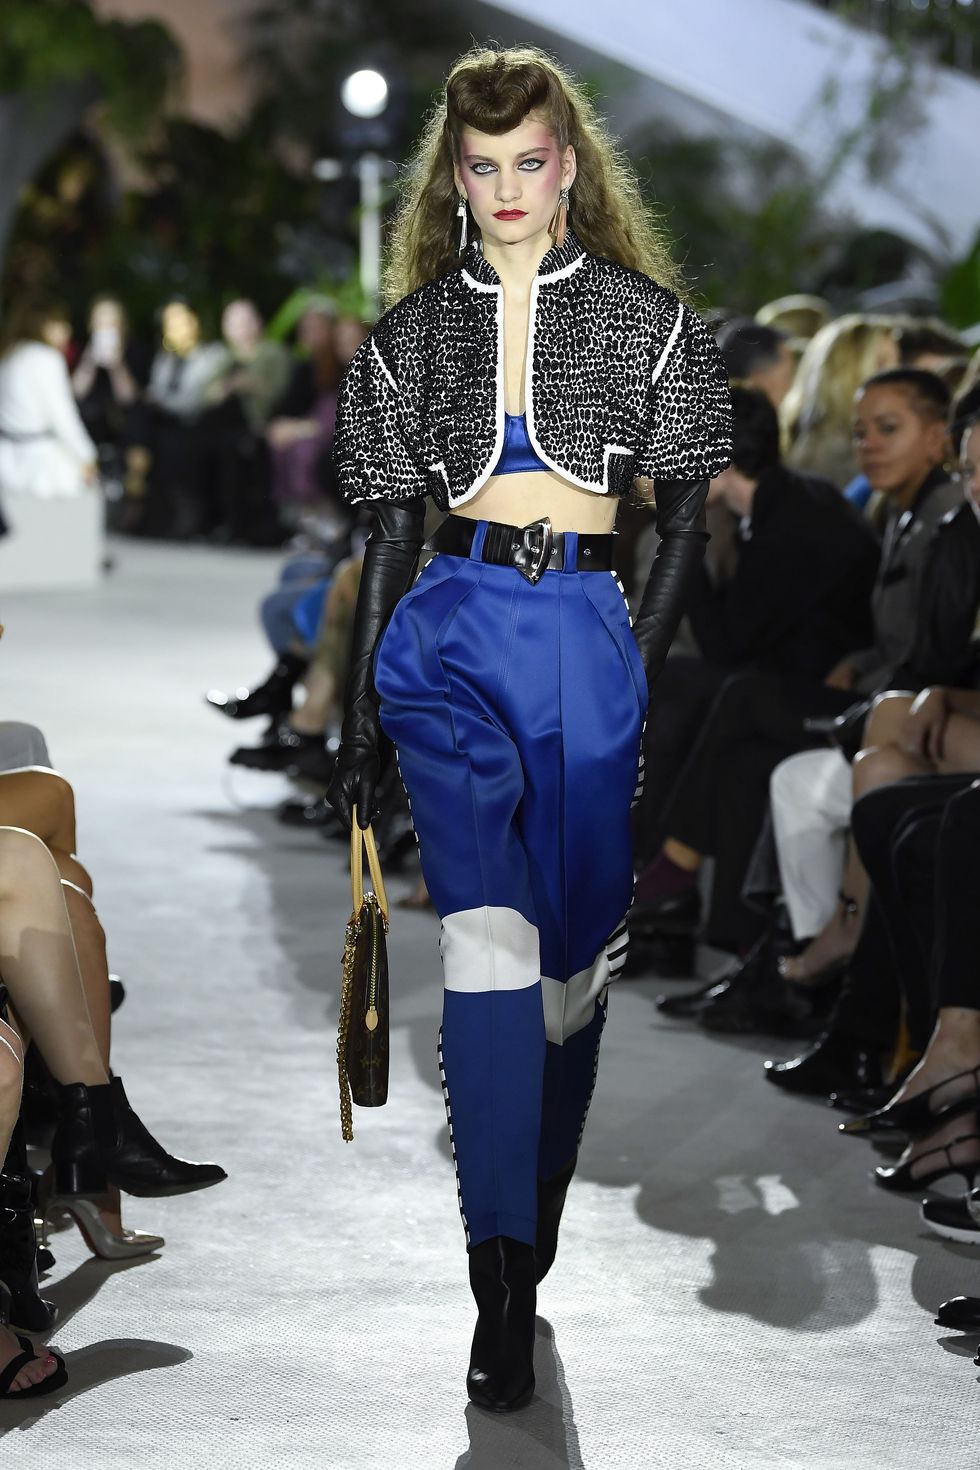 Louis Vuitton to Stage Cruise Show in Japan – WWD